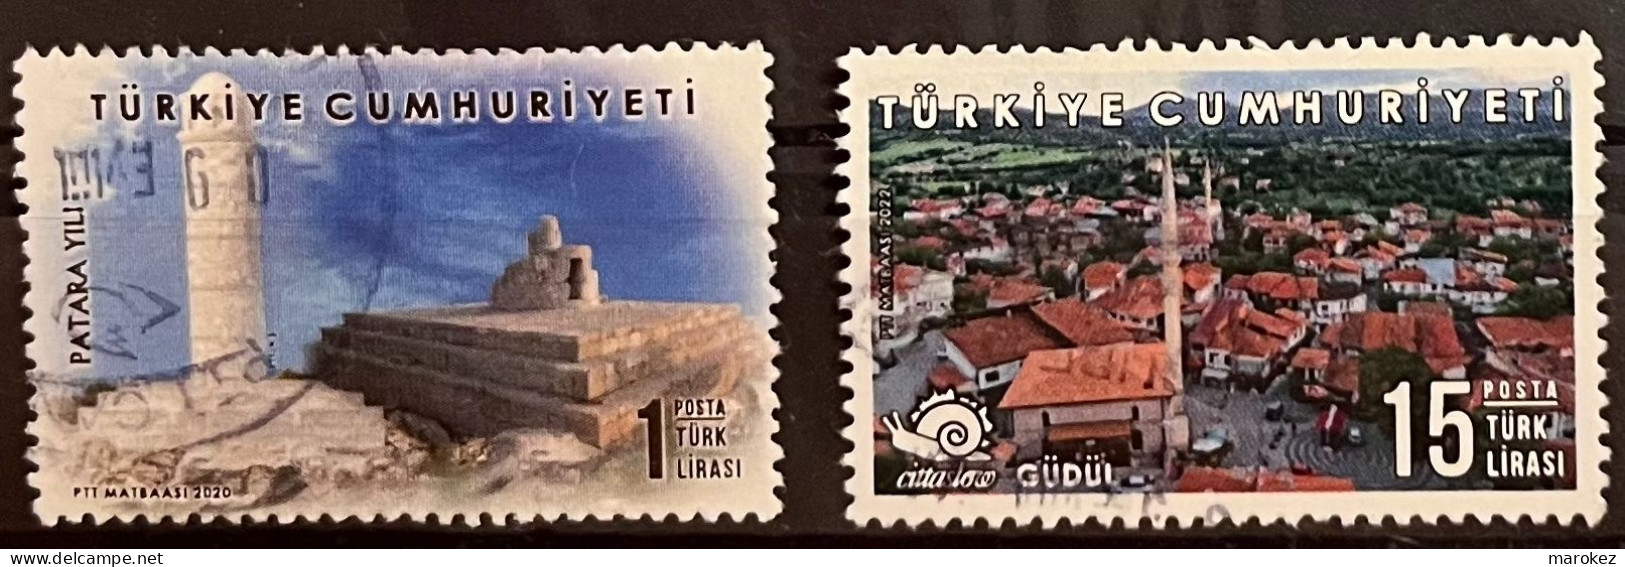 TURKEY 2020-2022 Cities - Patara & Guldul 2 Postally Used Definitives MICHEL # 4580,4694 - Used Stamps